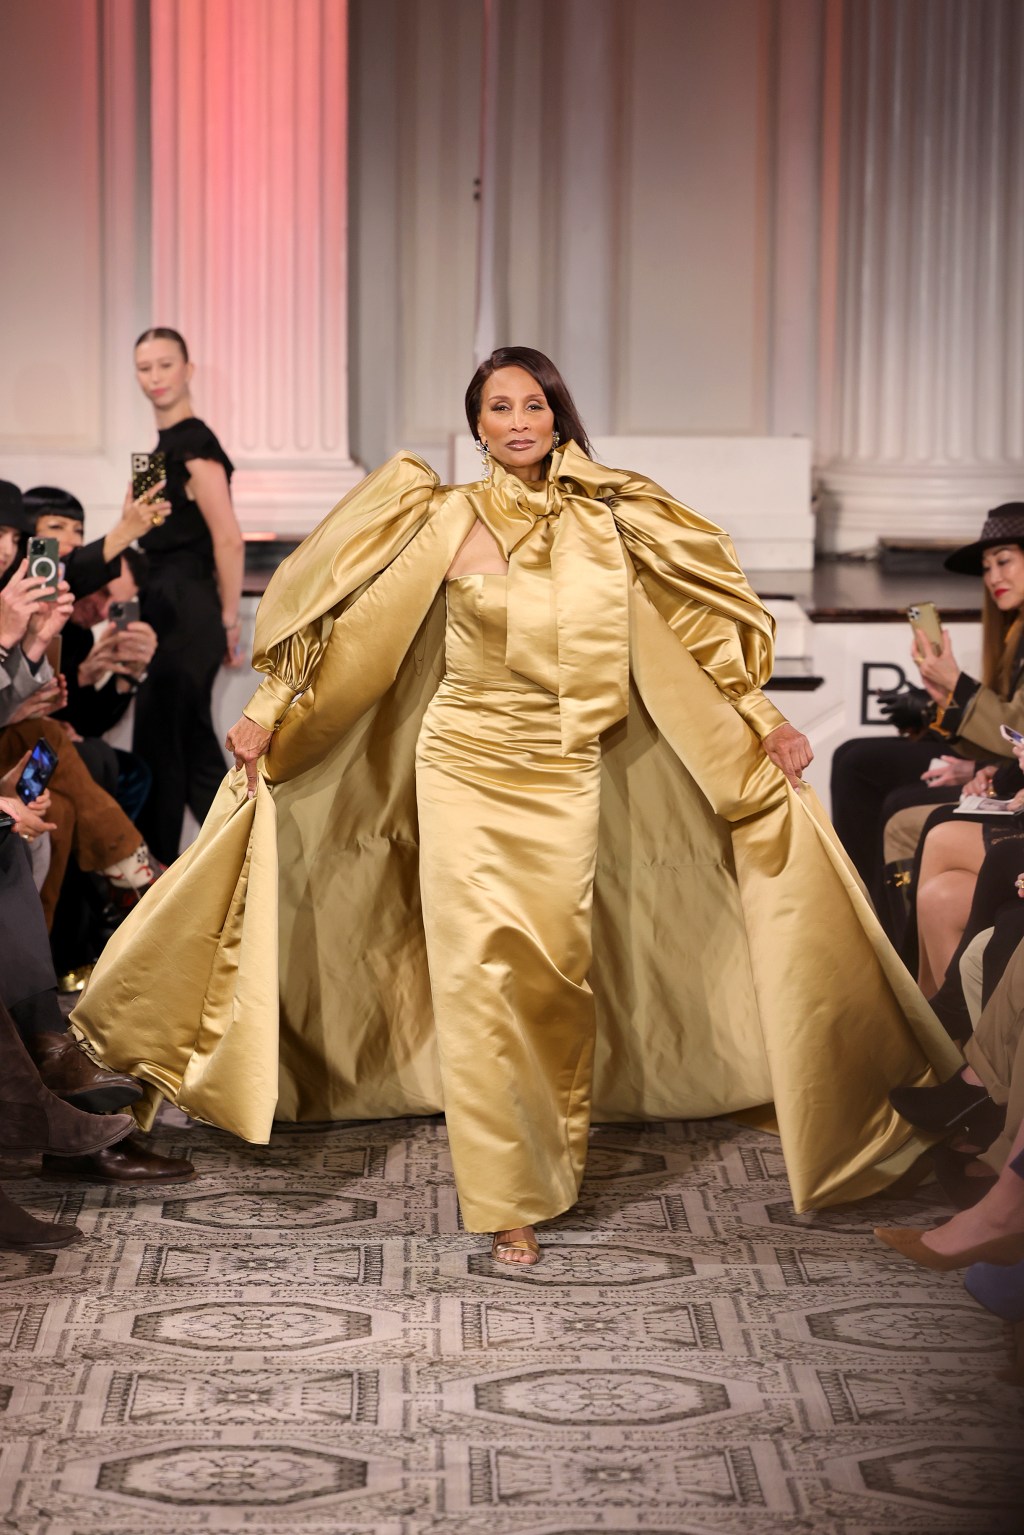 Beverly Johnson on runway in gold dress.